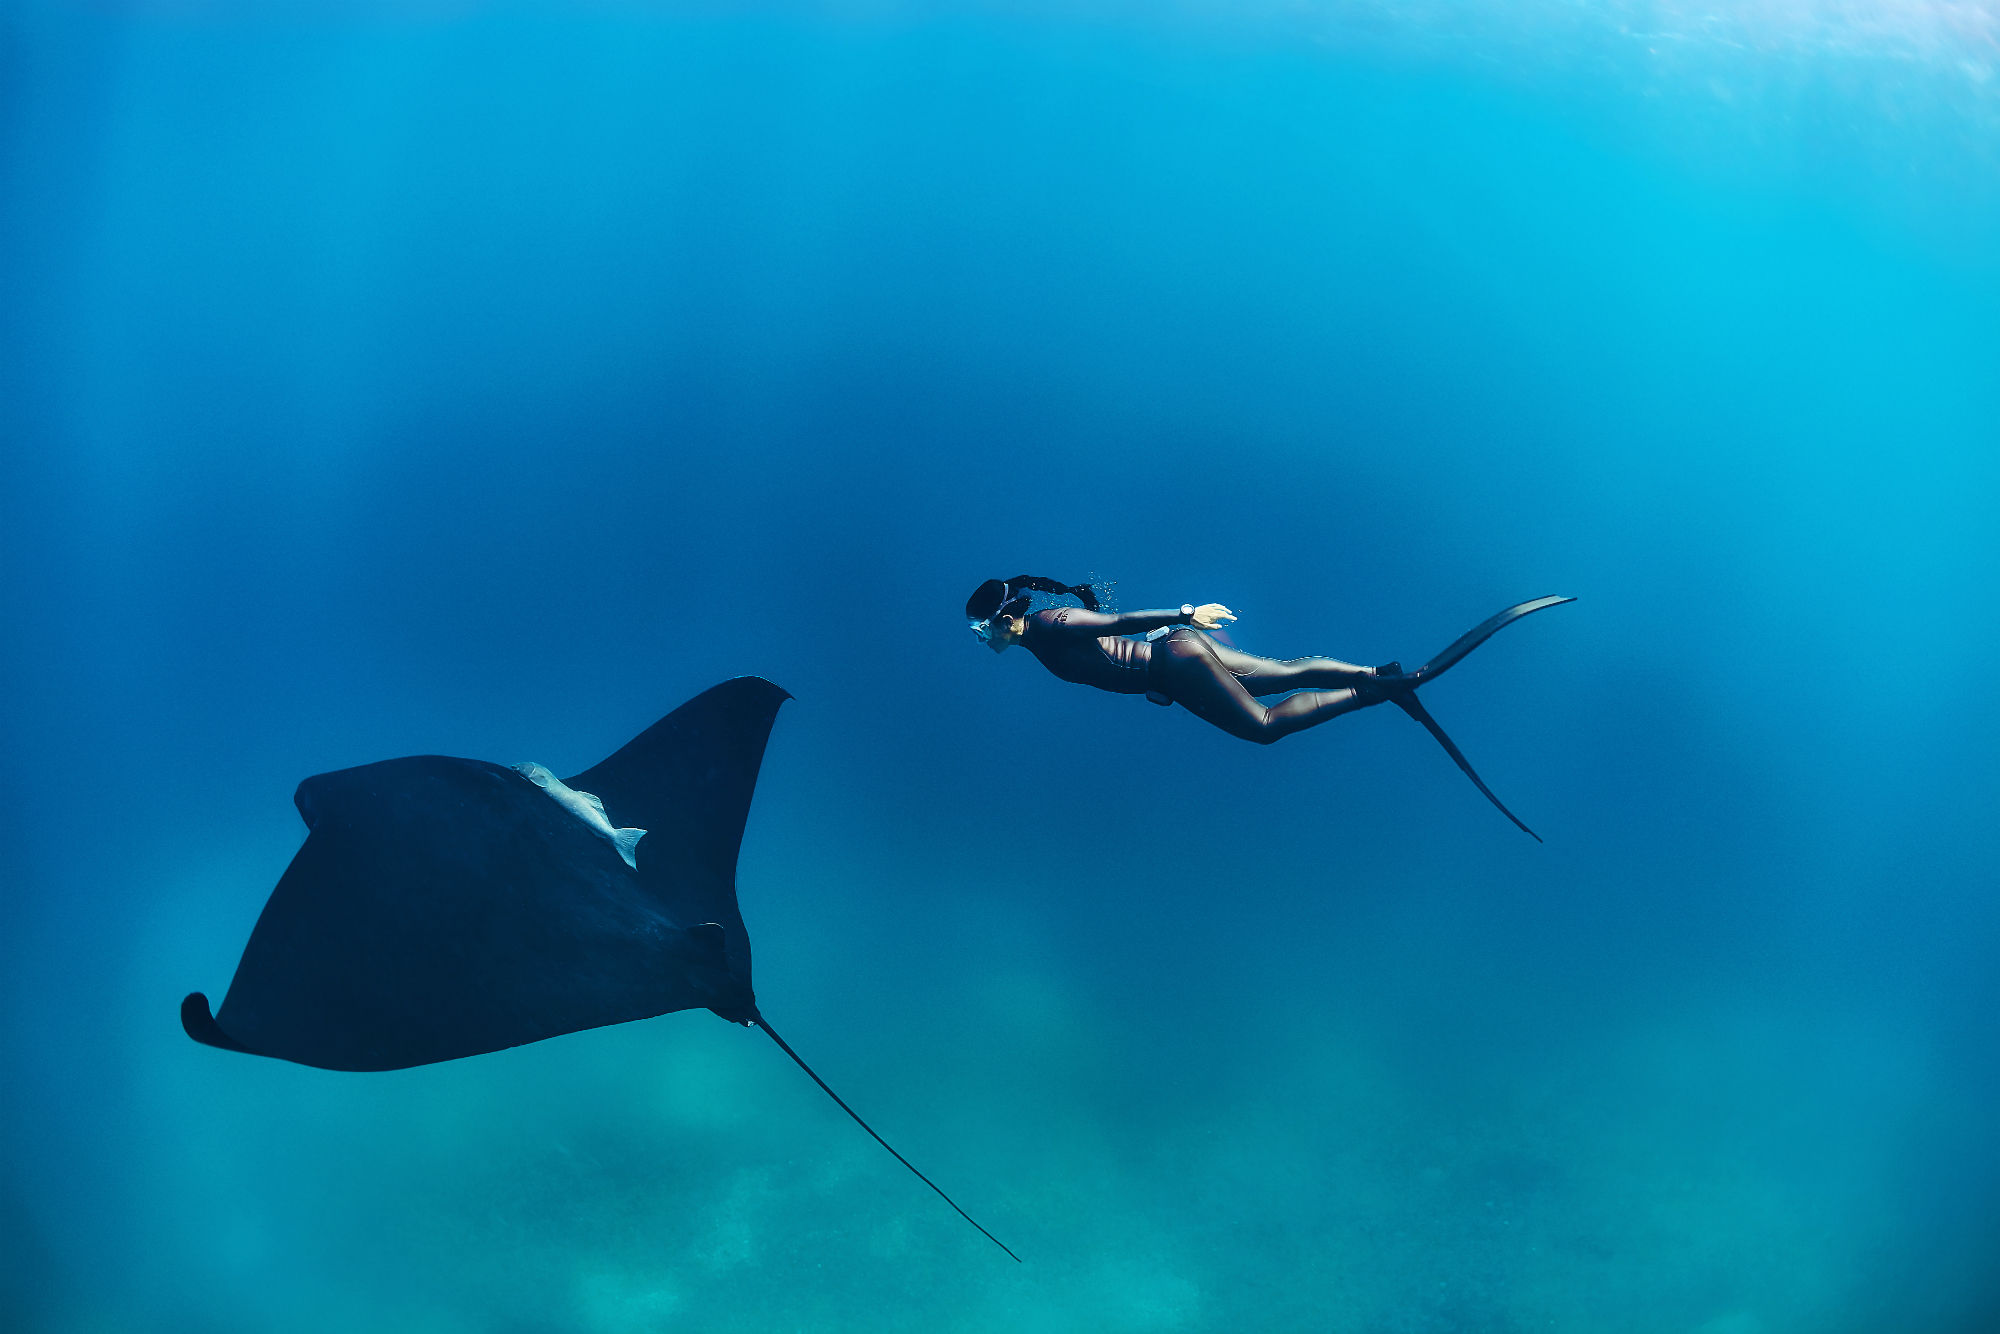 Free diver Hanli Prinsloo: “There are more plastics in the ocean than you think.”